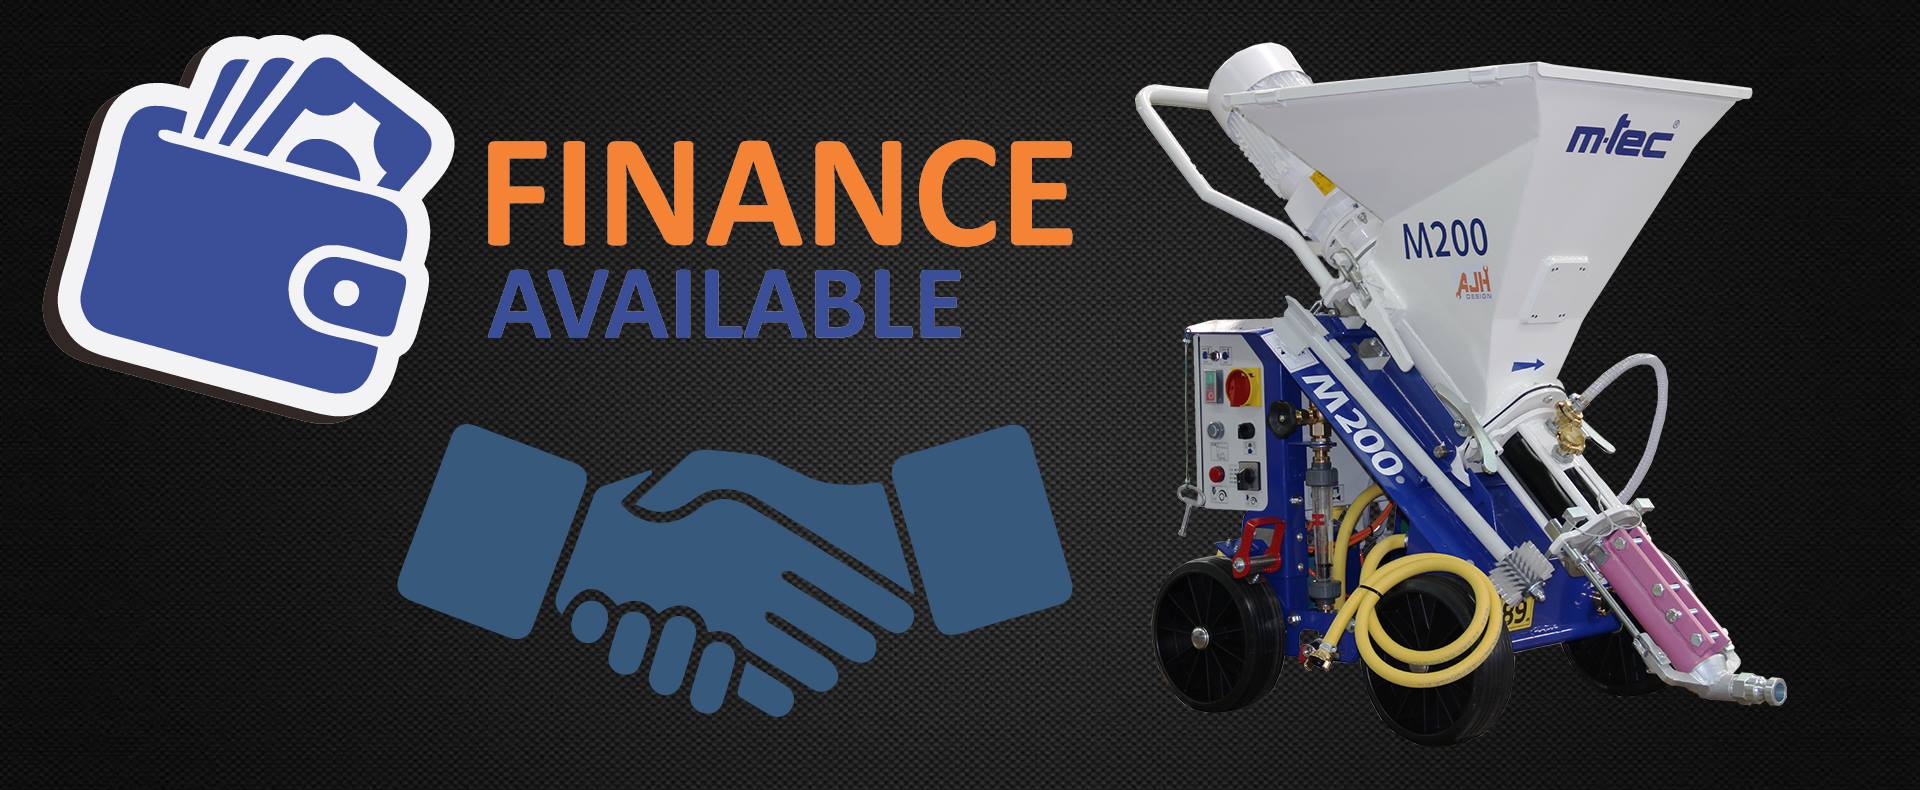 Finance available on the M-tec M200